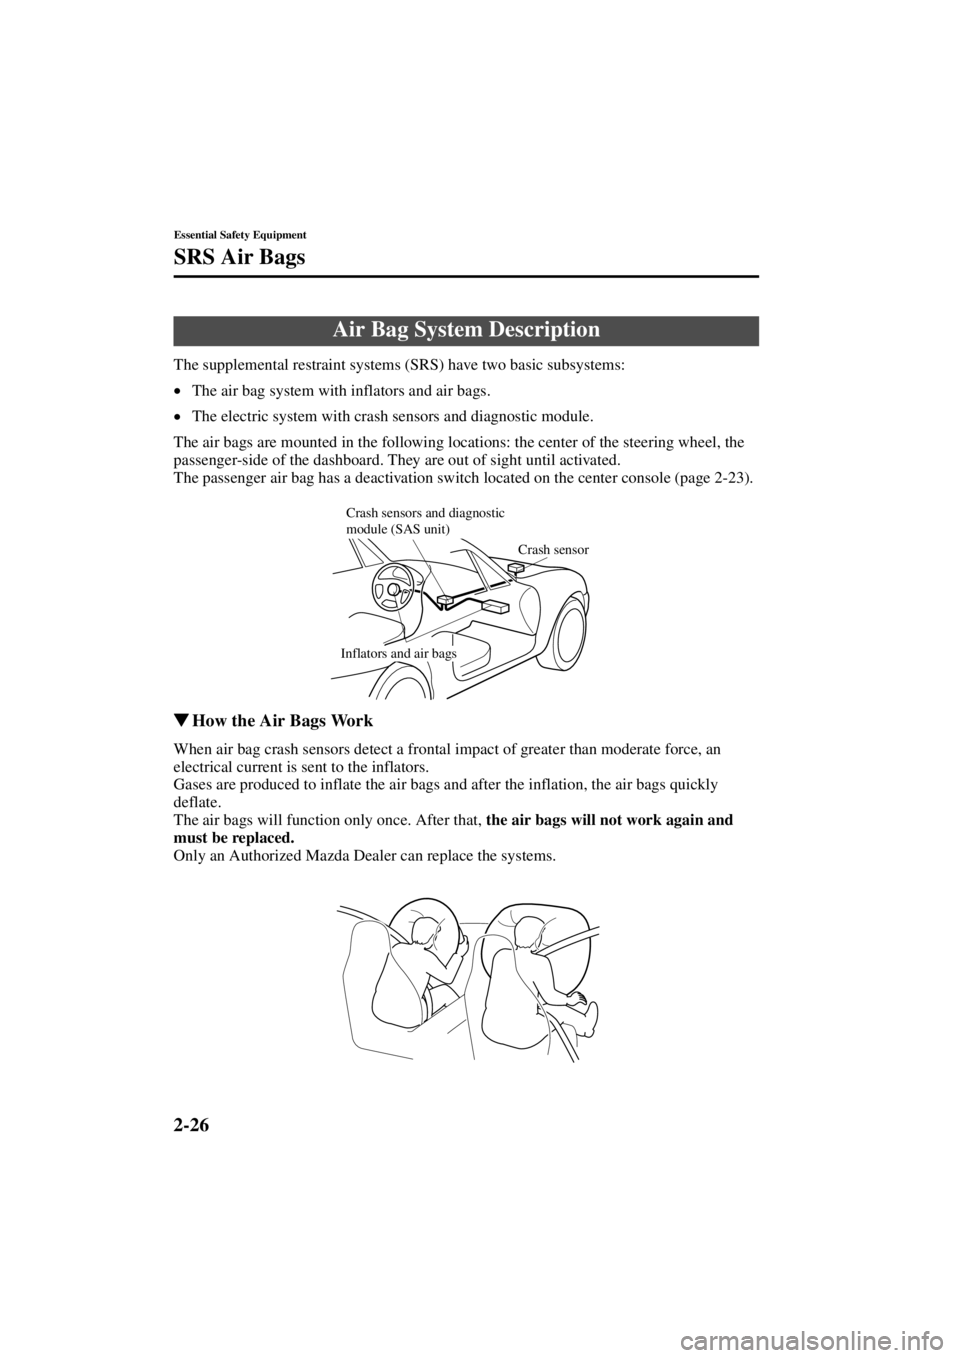 MAZDA MODEL SPEED MX-5 MIATA 2004 Owners Guide 2-26
Essential Safety Equipment
SRS Air Bags
Form No. 8T02-EA-03L
The supplemental restraint systems (SRS) have two basic subsystems:
•The air bag system with inflators and air bags.
• The electri